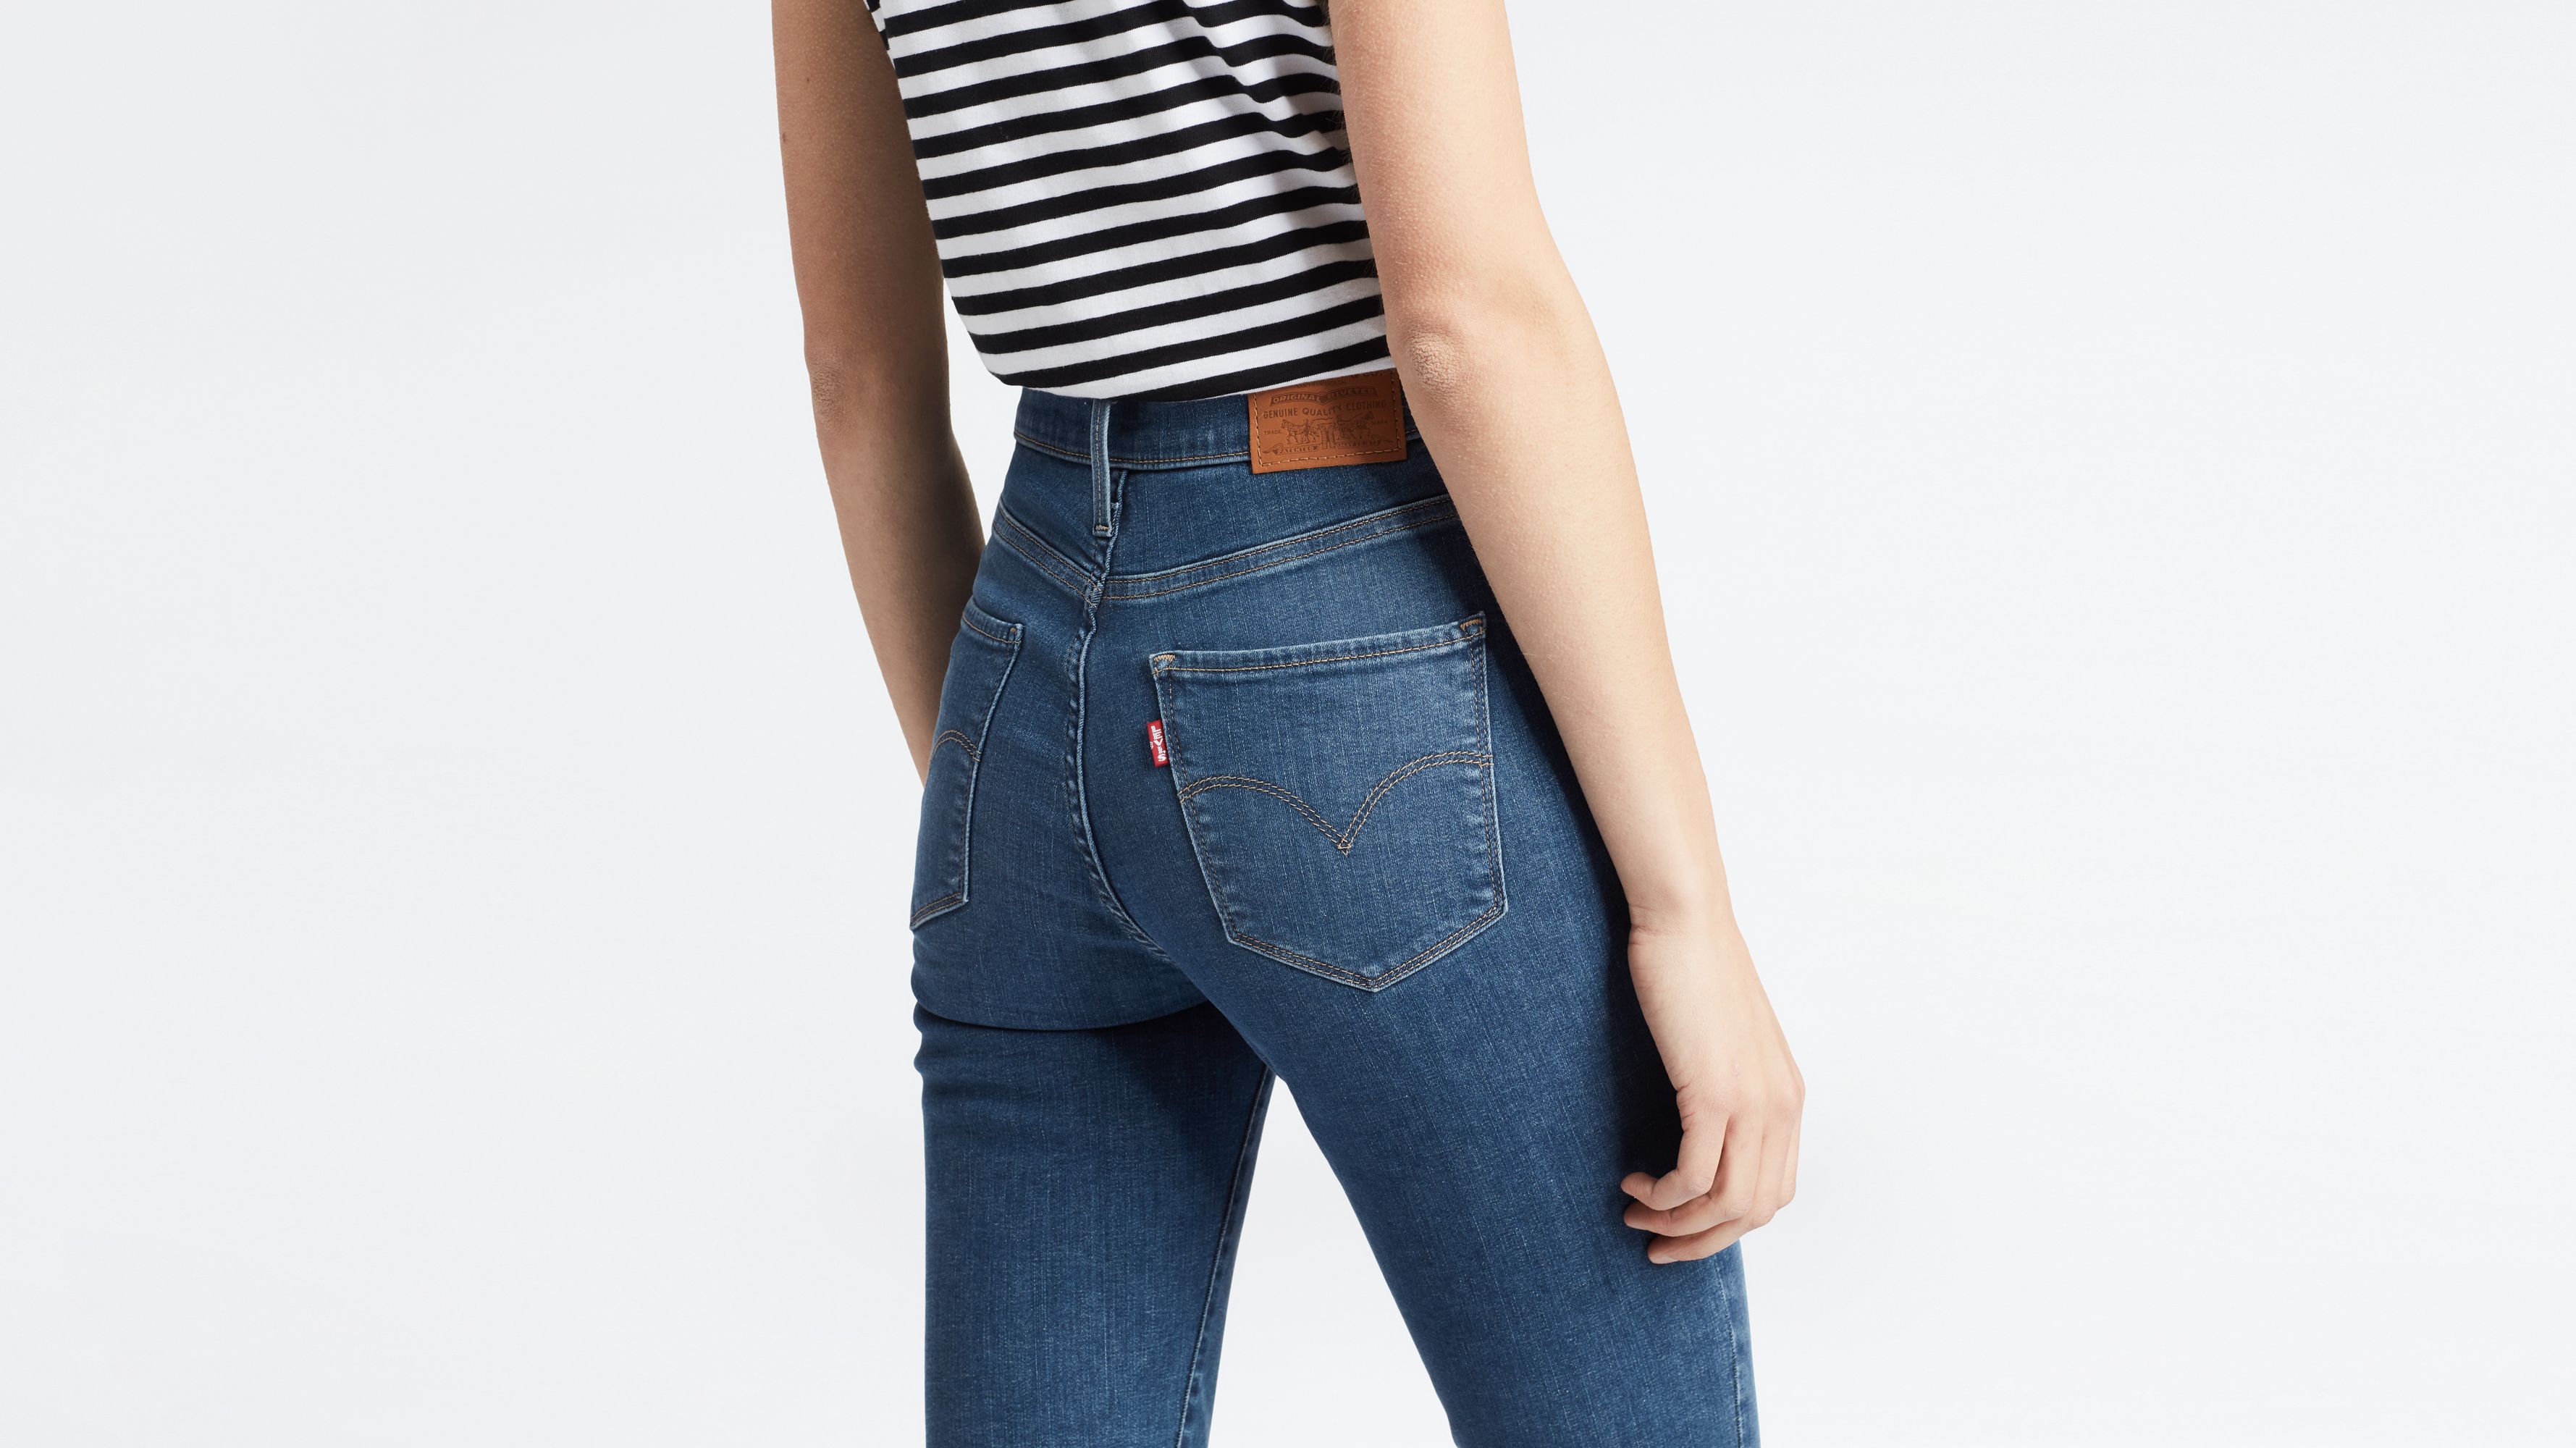 levis high waisted jeans